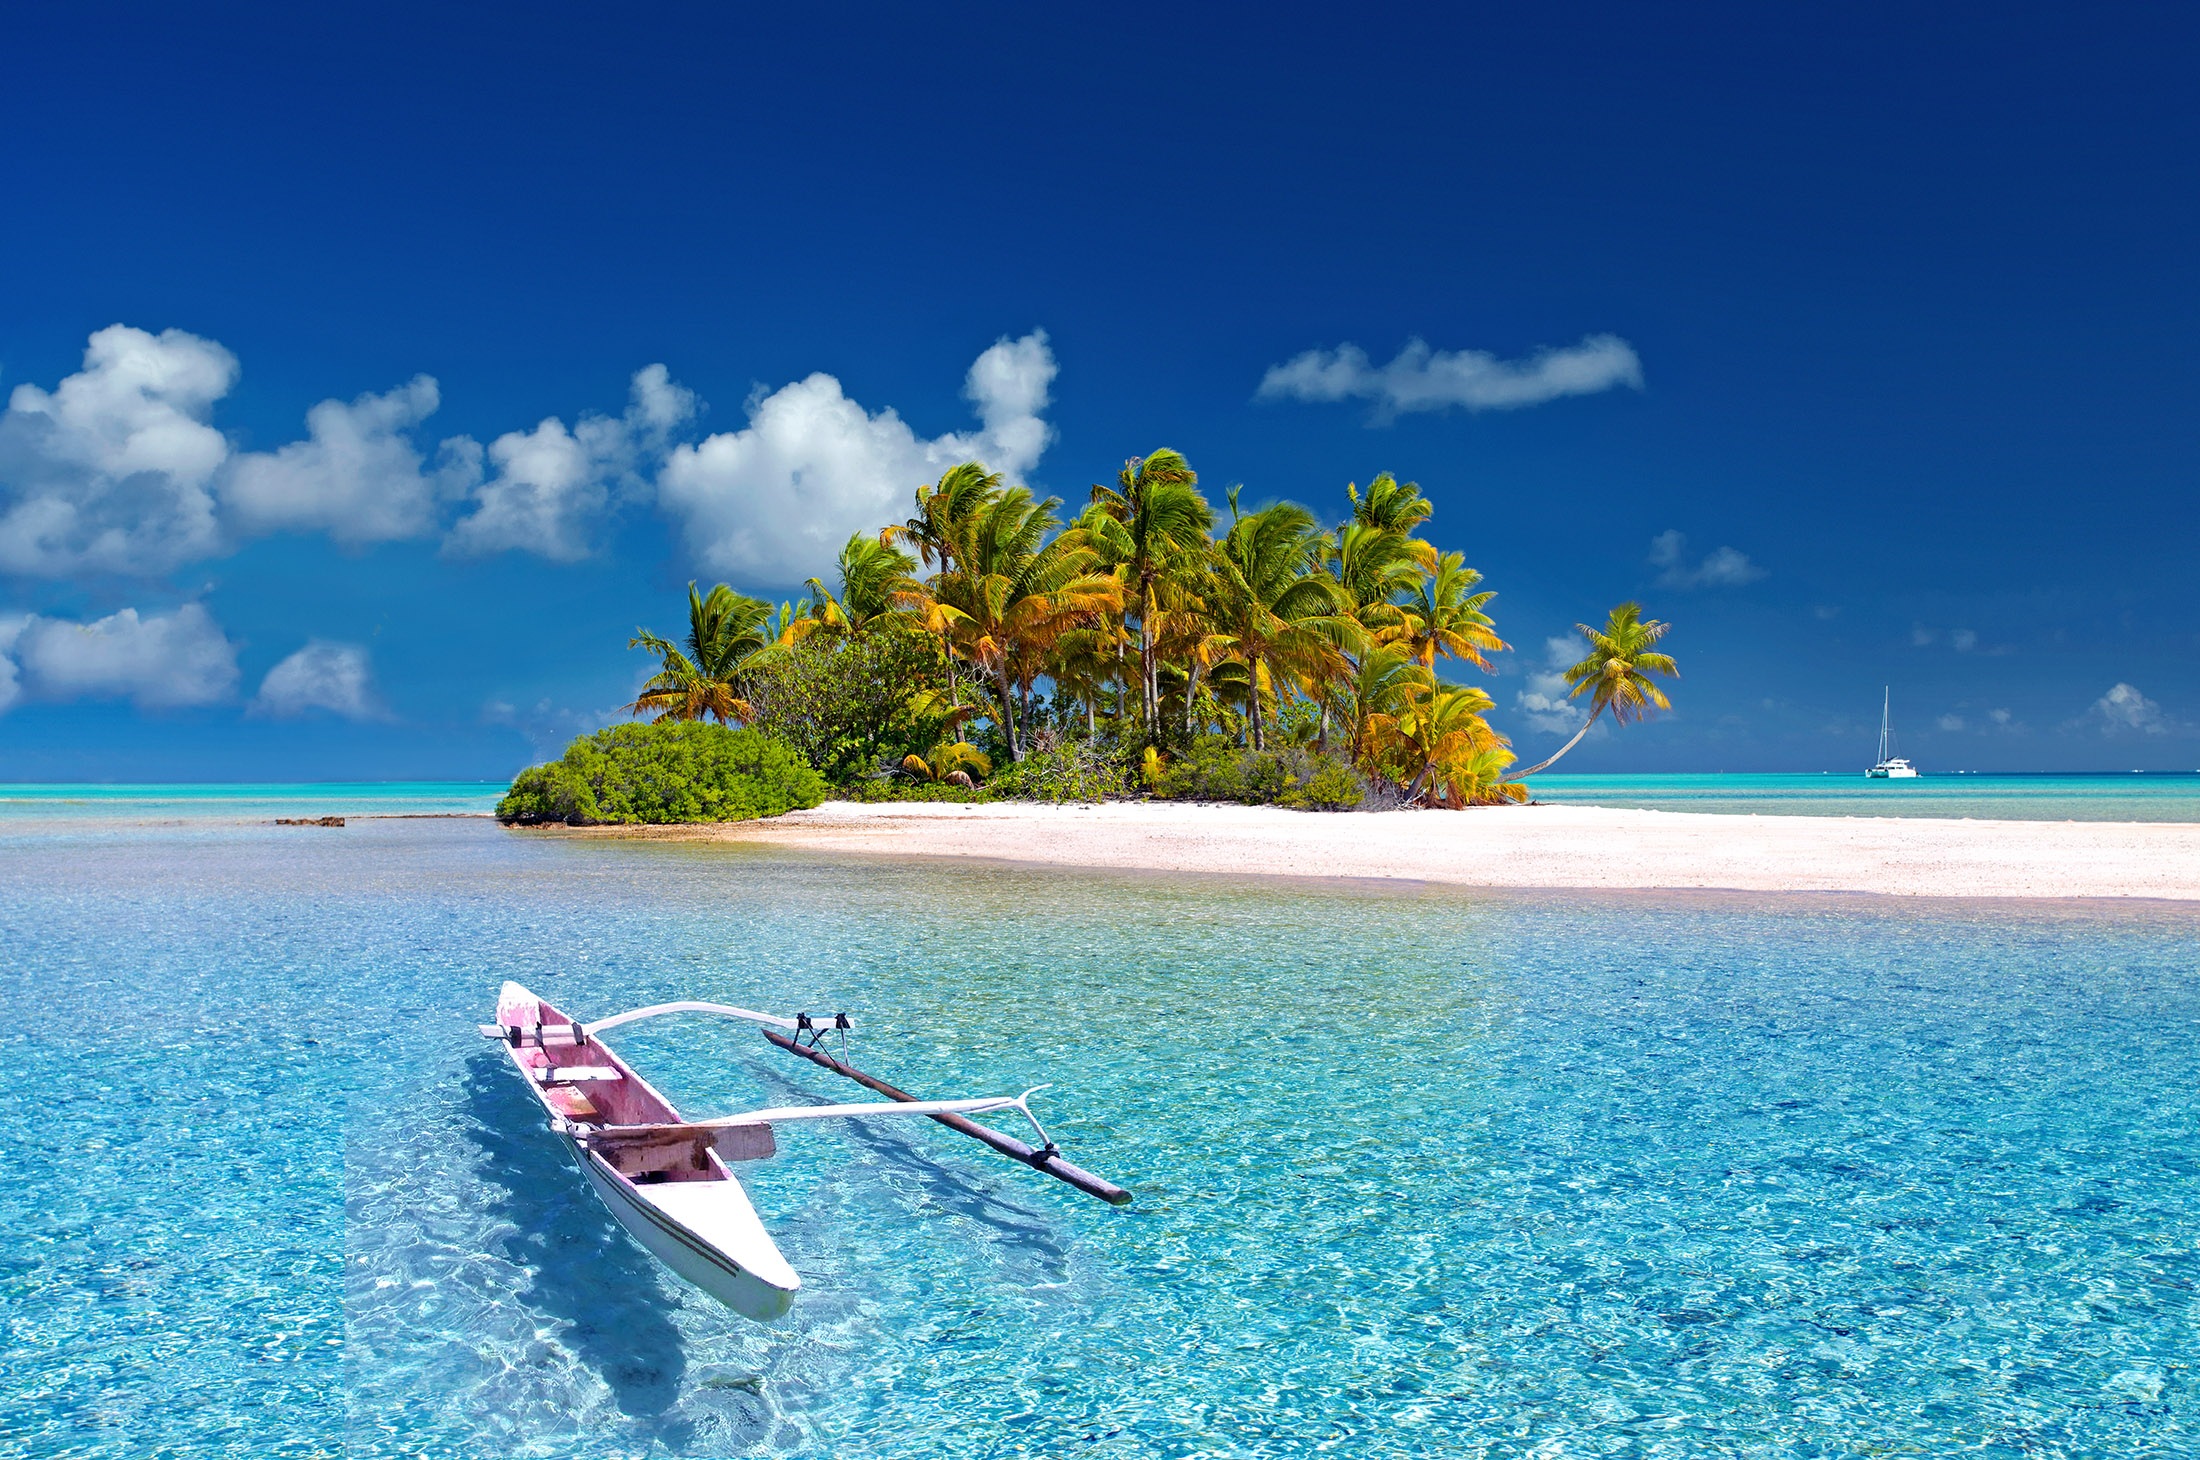 Wallpapers beautiful beach travel discover on the desktop